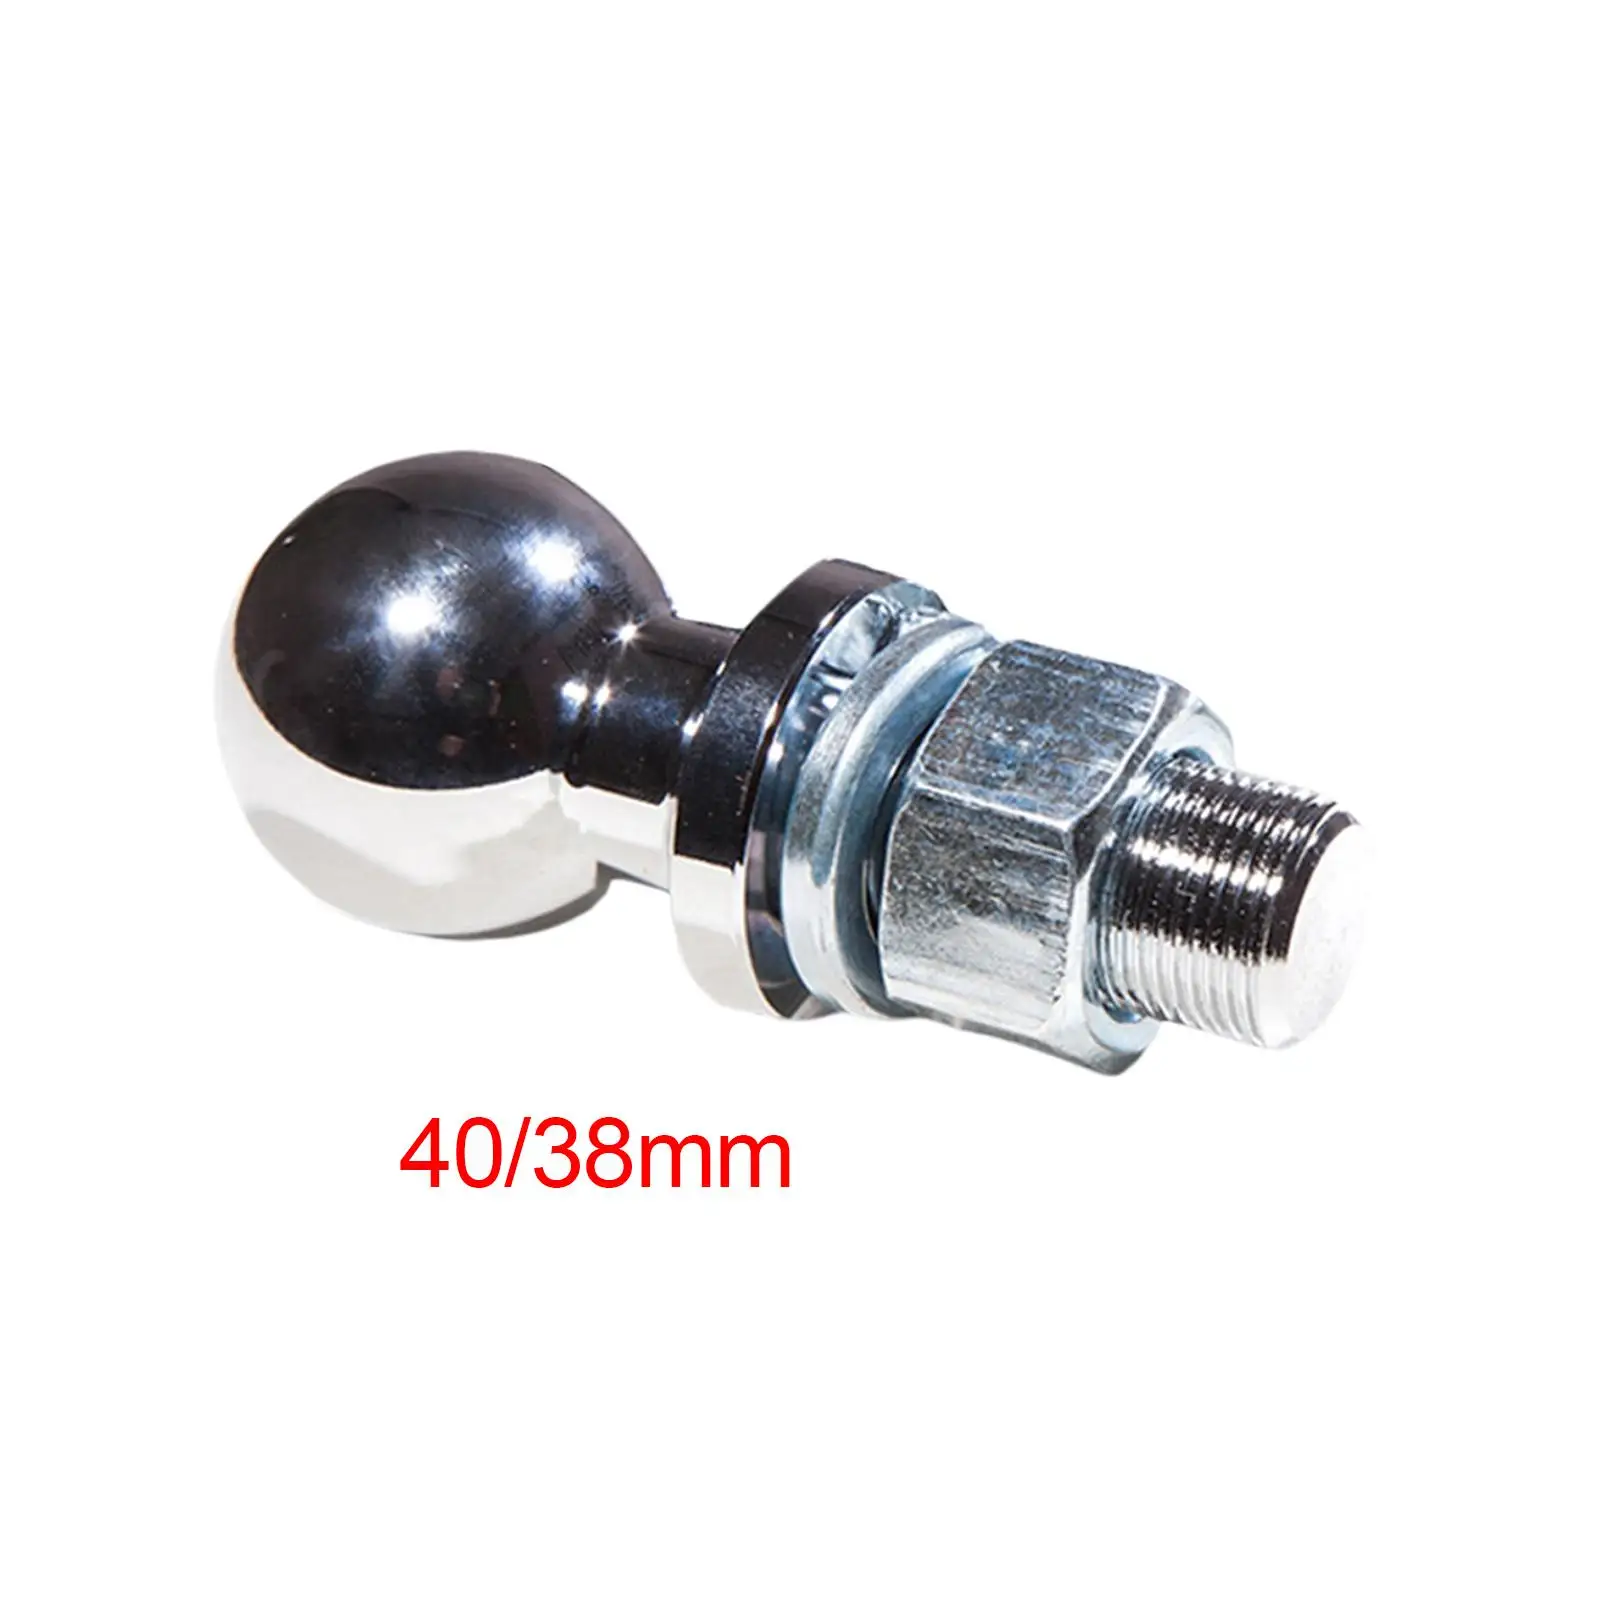 Trailer Connector Ball Head 2 inch Durable Professional Portable for RV